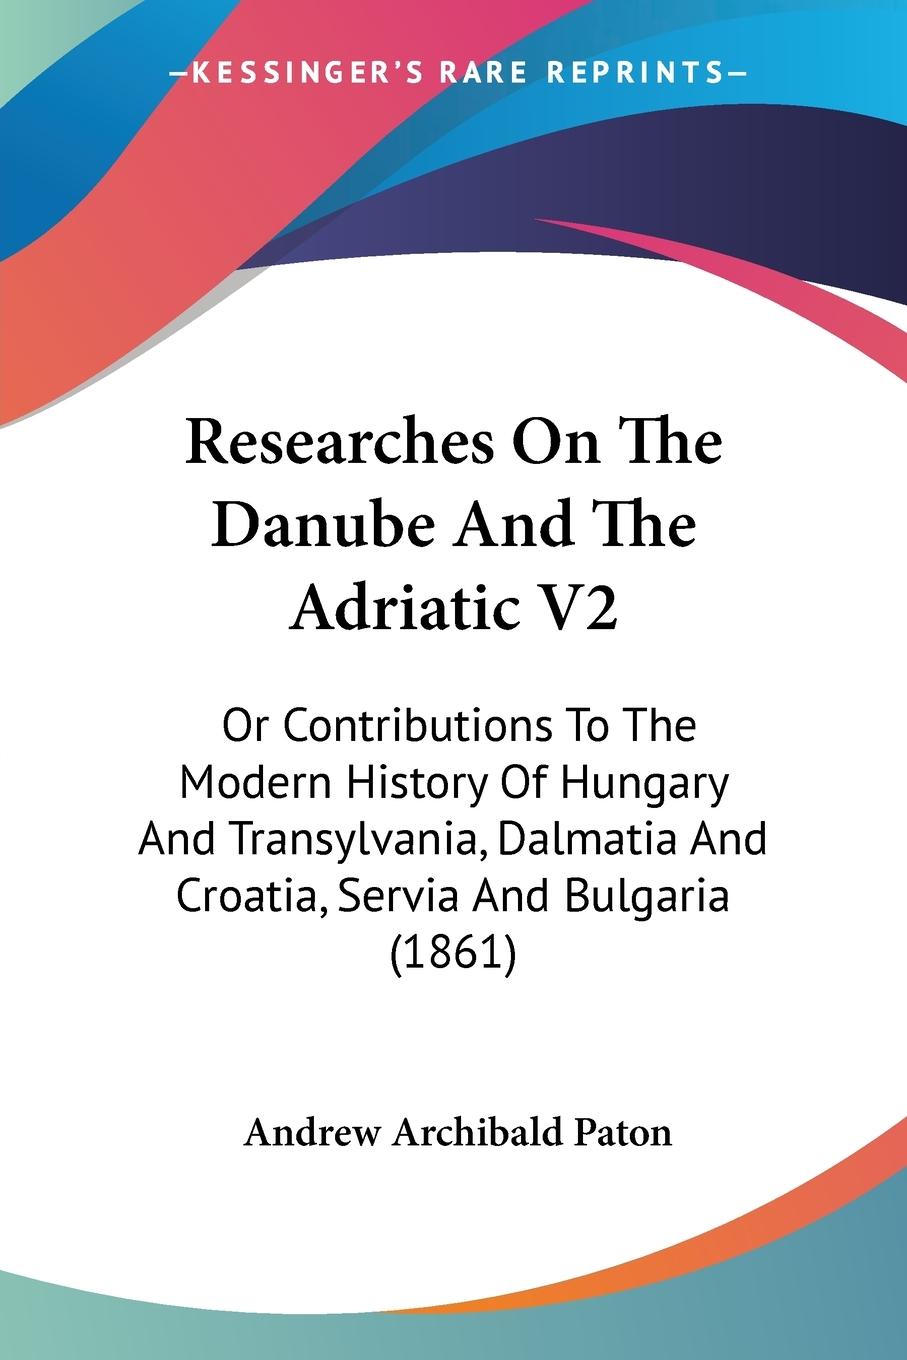 Researches On The Danube And The Adriatic V2 - Paton, Andrew Archibald